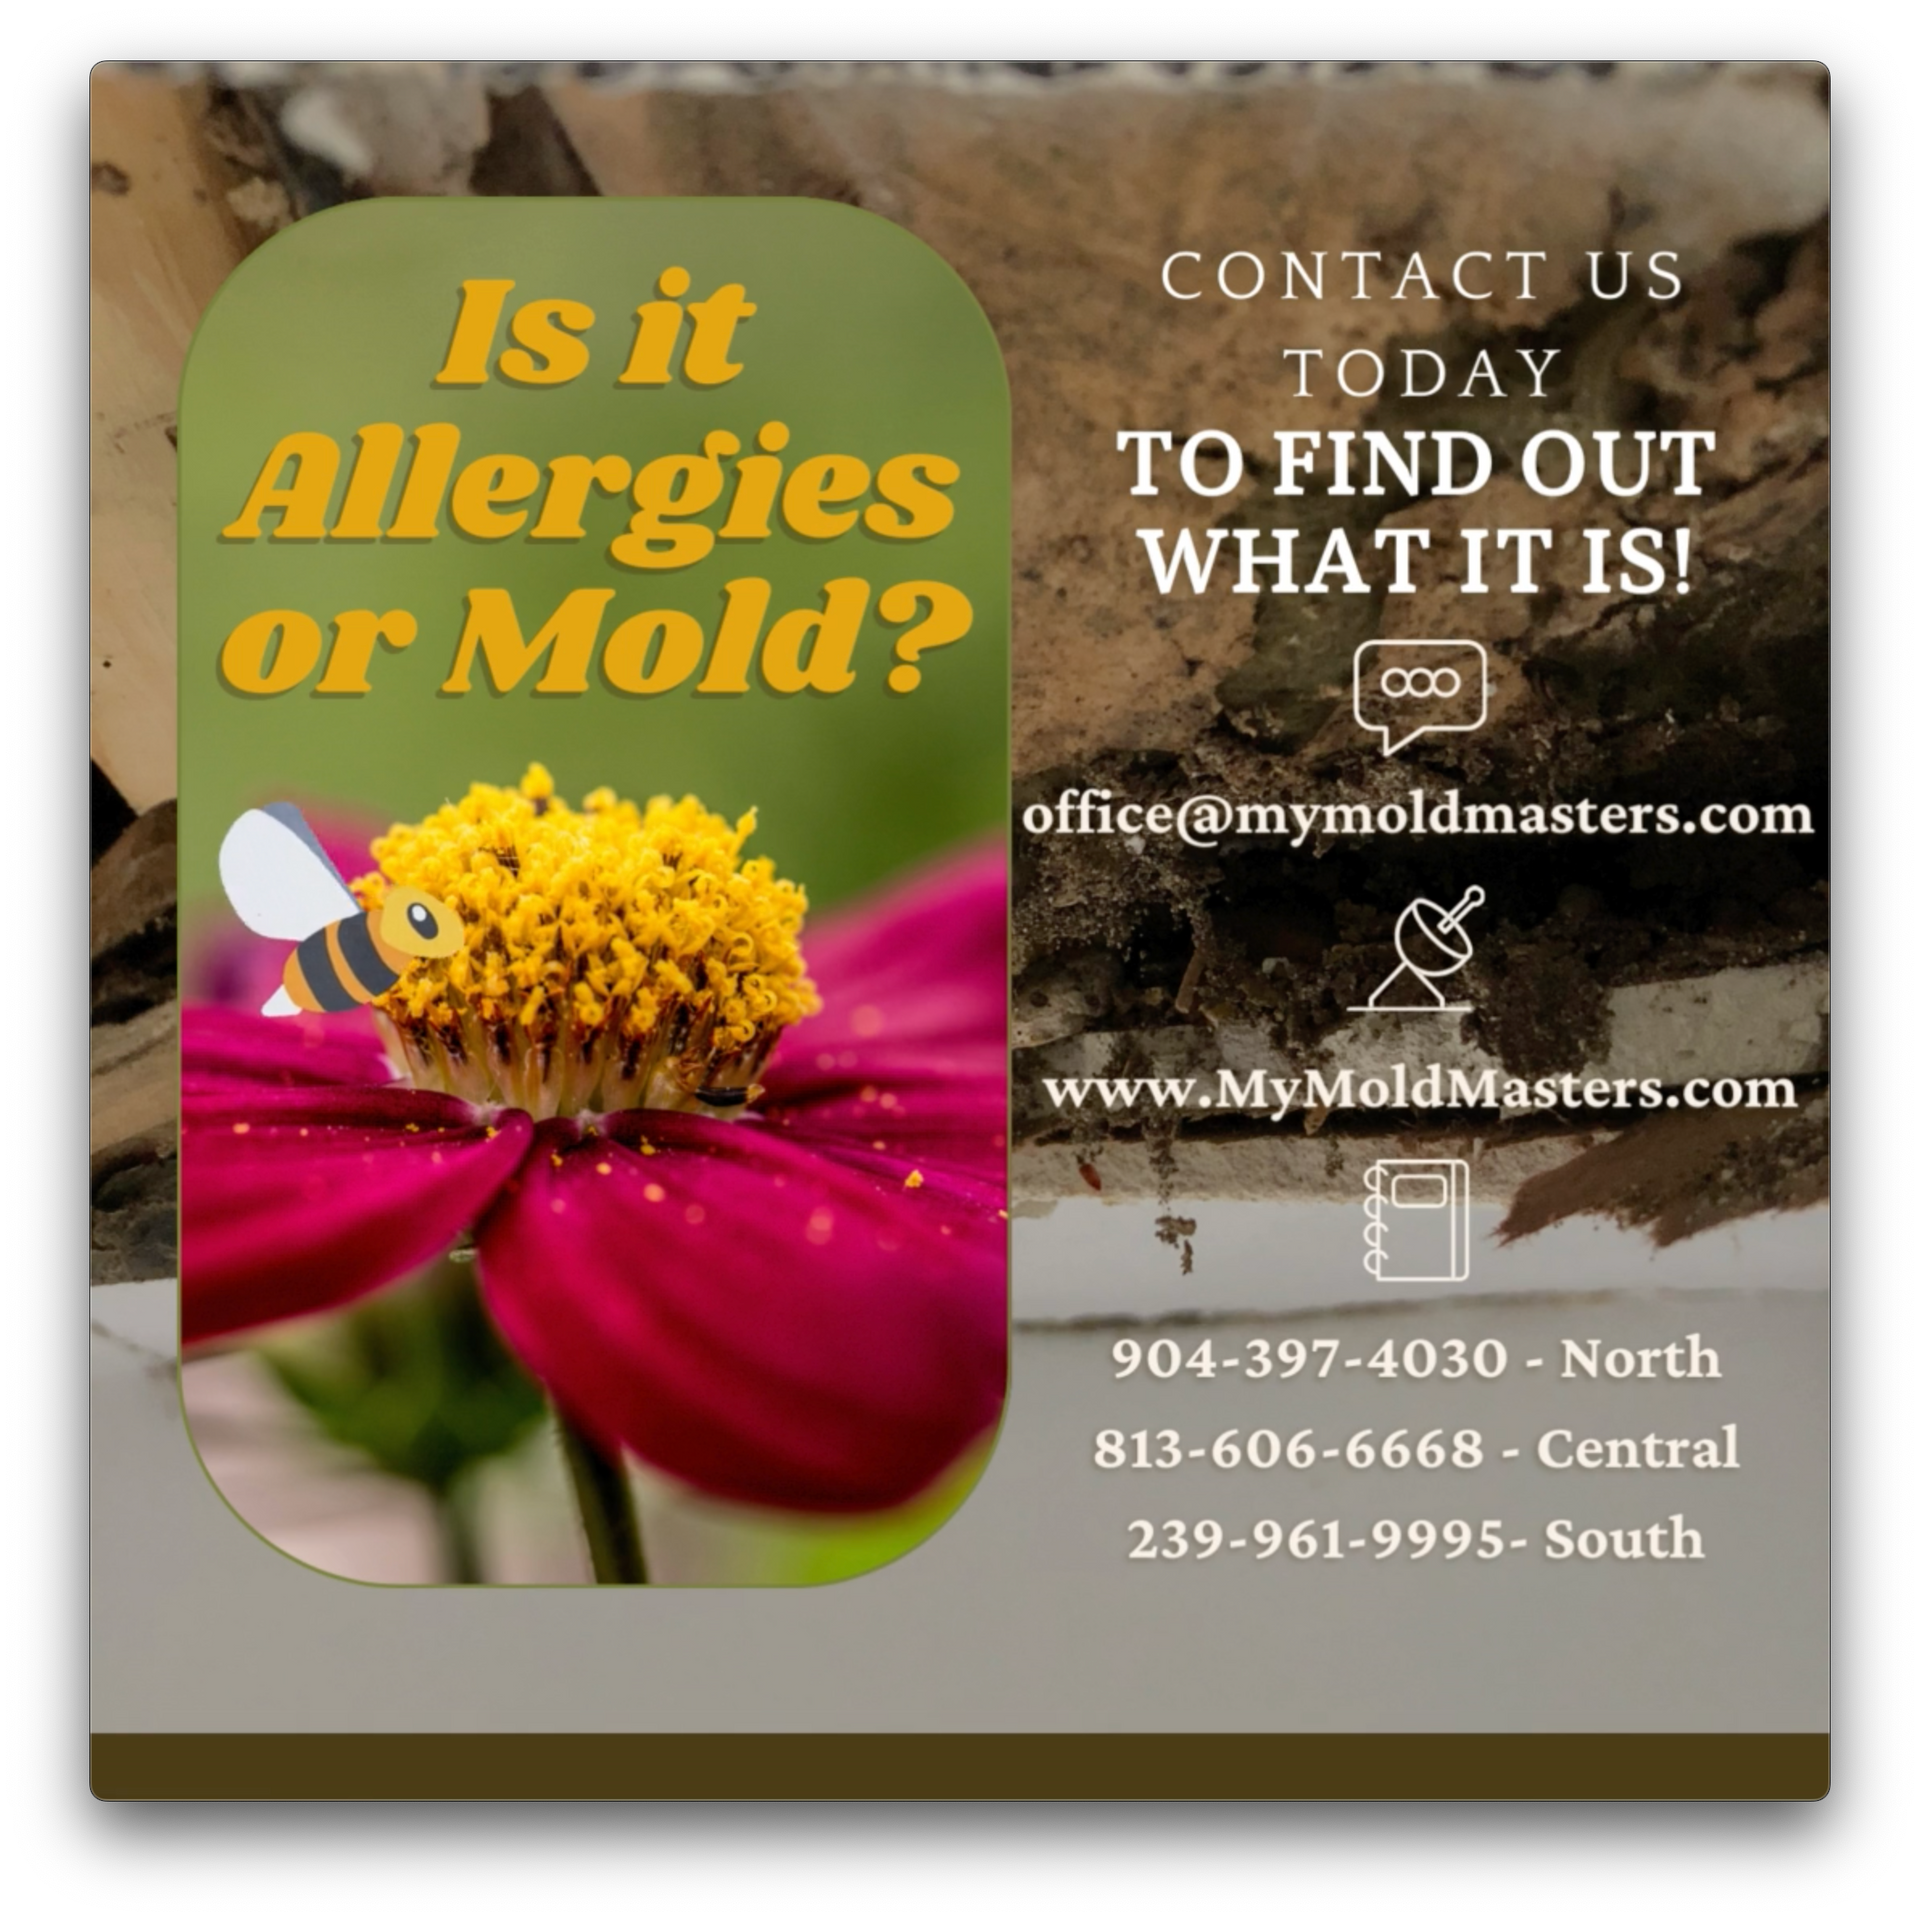 spring allergies, mold, air quality, seasonal allergies, allergy problems, mold allegries